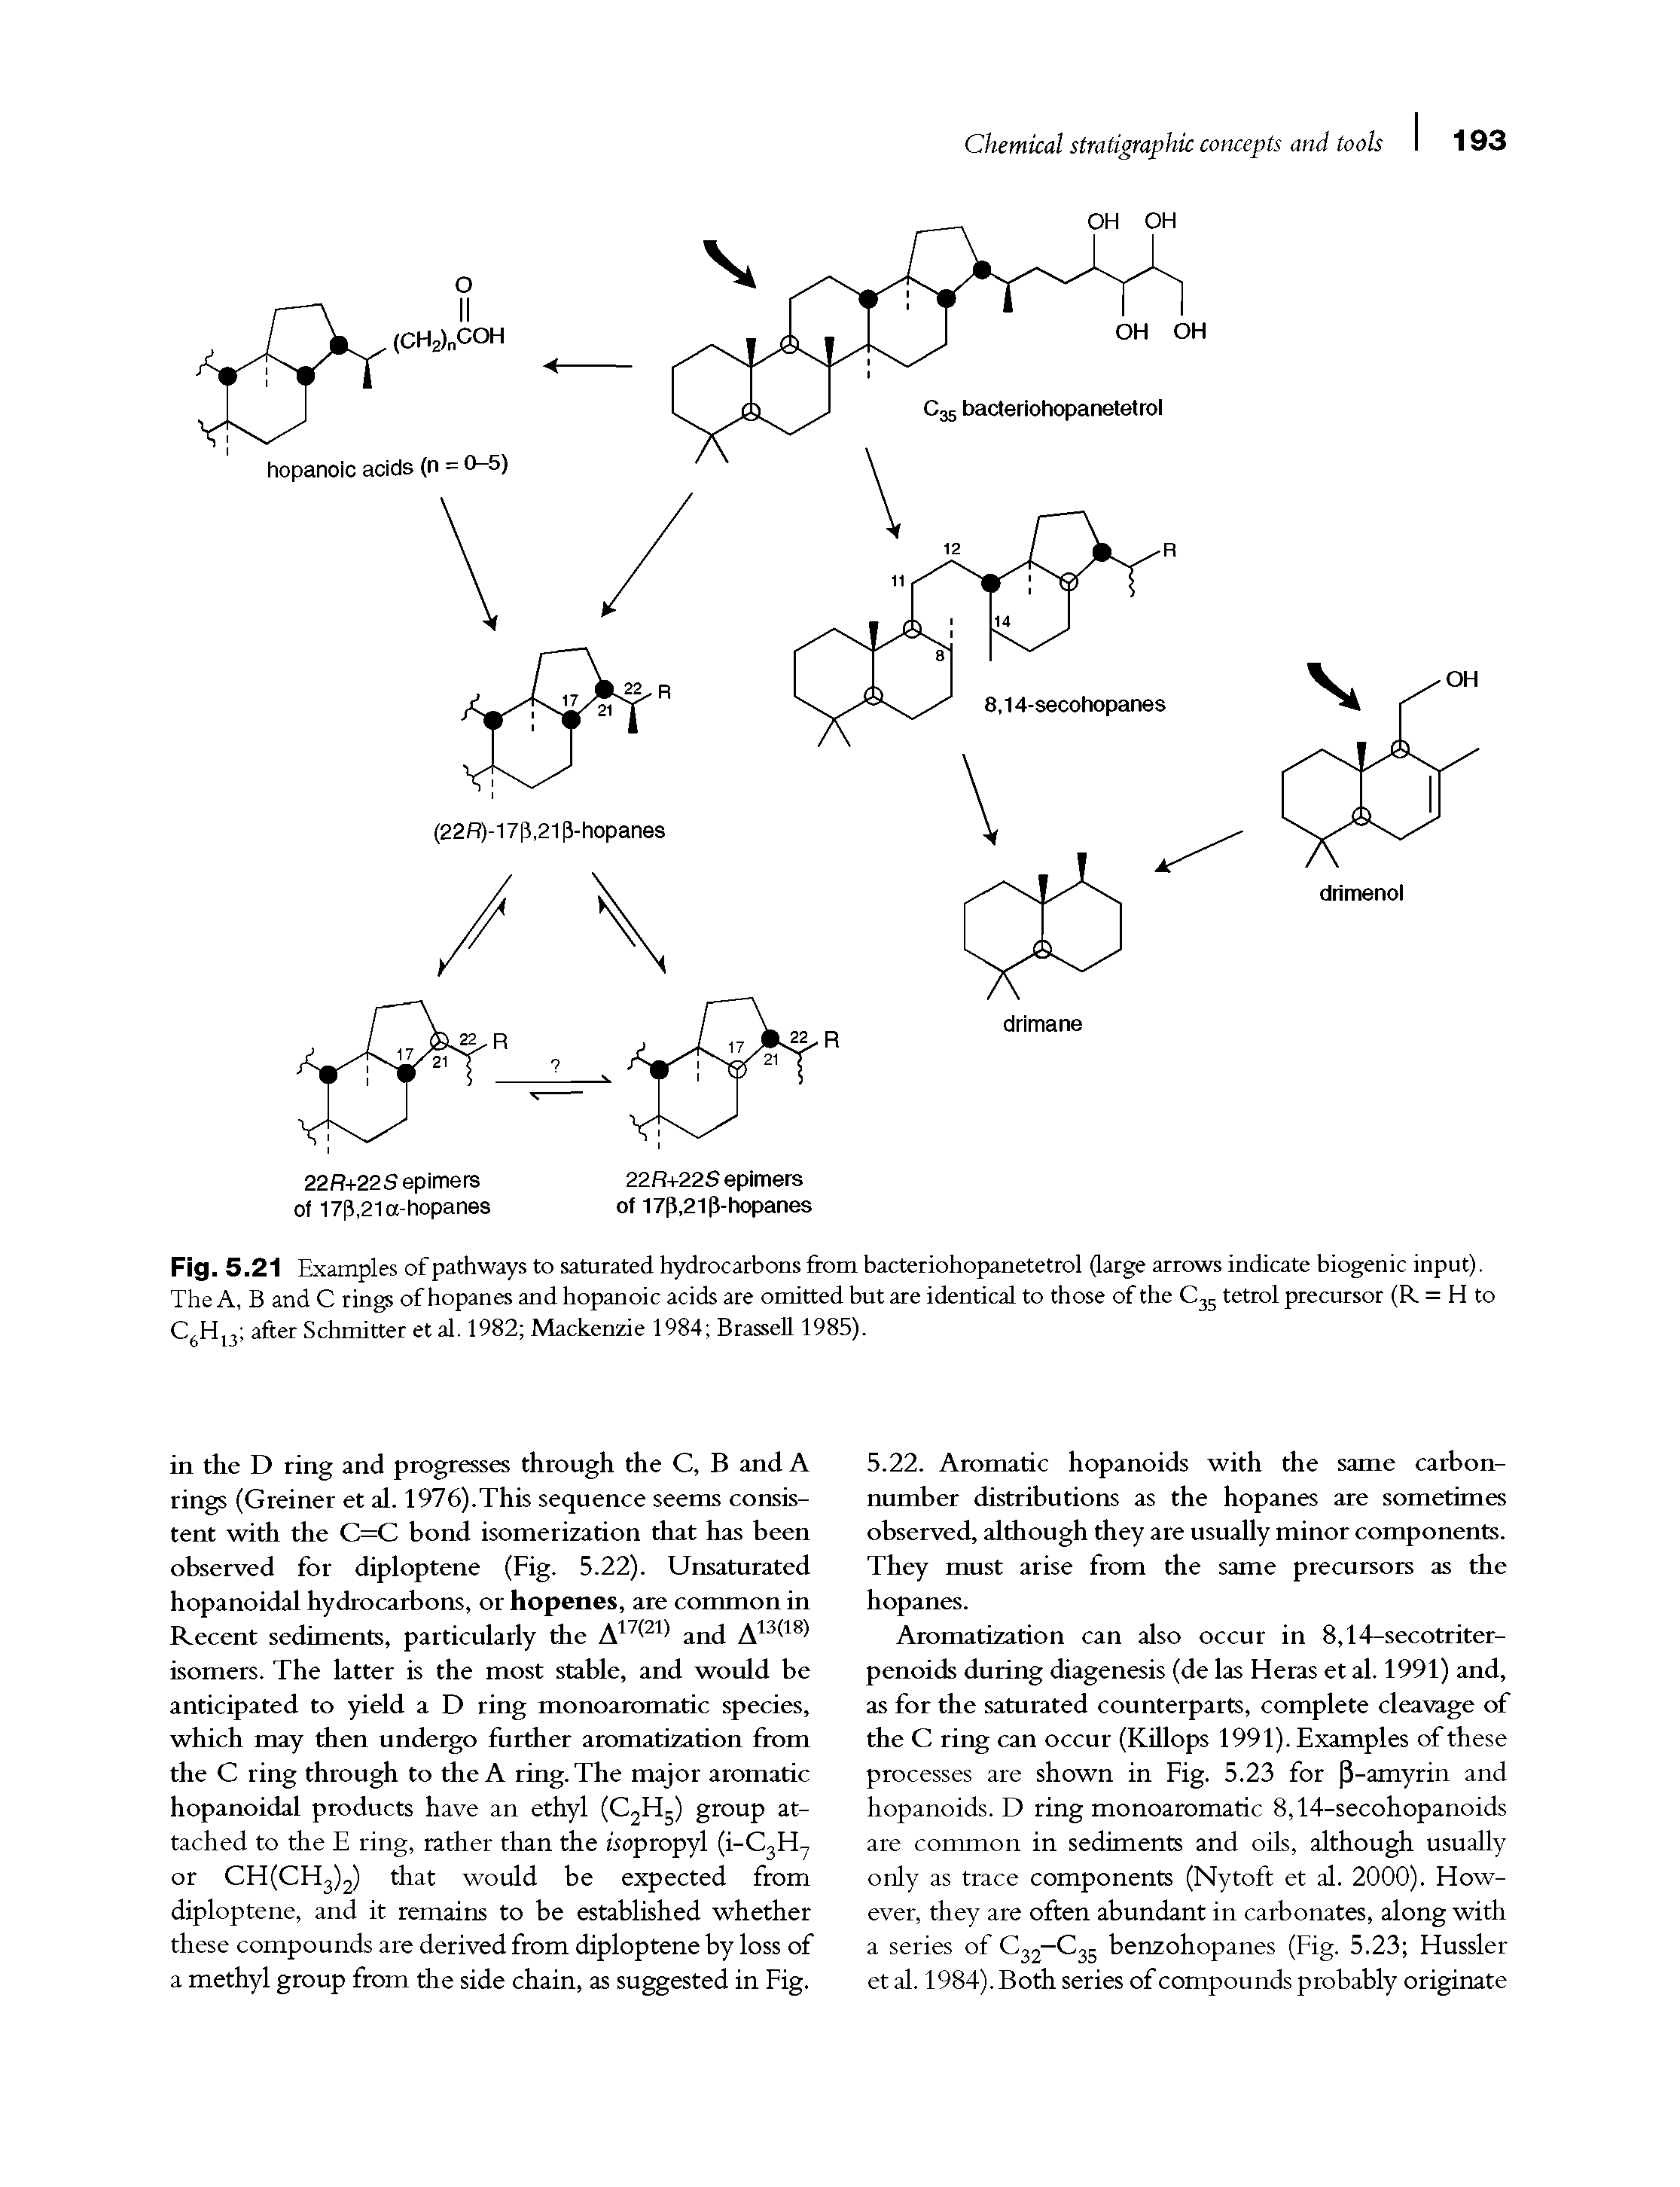 Fig. 5.21 Examples of pathways to saturated hydrocarbons from bacteriohopanetetrol (large arrows indicate biogenic input). The A, B and C rings of hopanes and hopanoic acids are omitted but are identical to those of the C35 tetrol precursor (R = H to C6H13 after Schmitter et al. 1982 Mackenzie 1984 Brassell 1985).